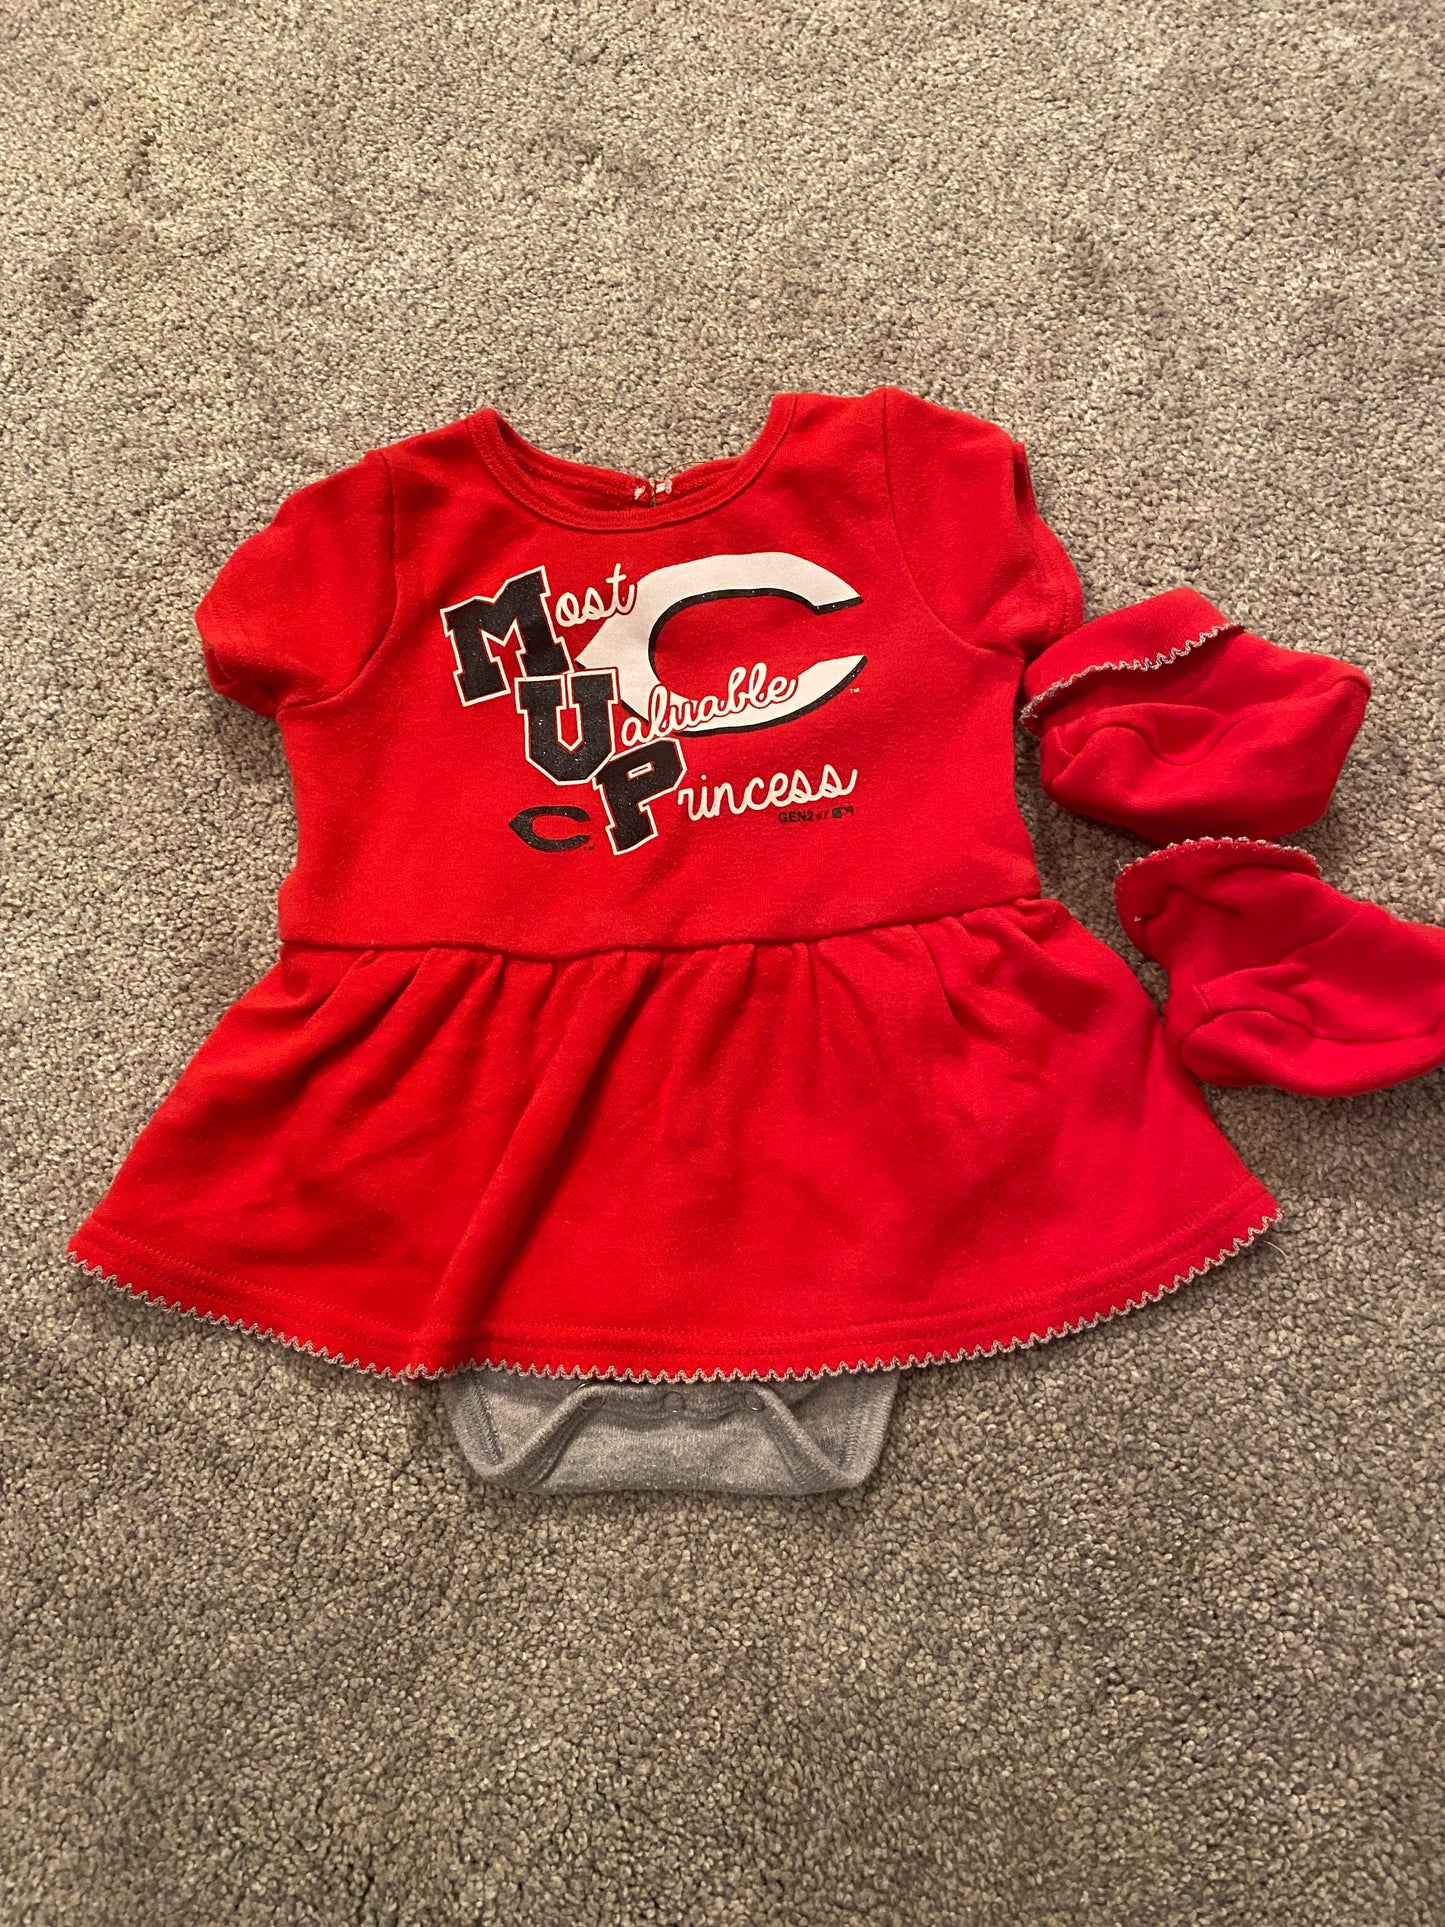 6-9 months Reds Outfit & Booties